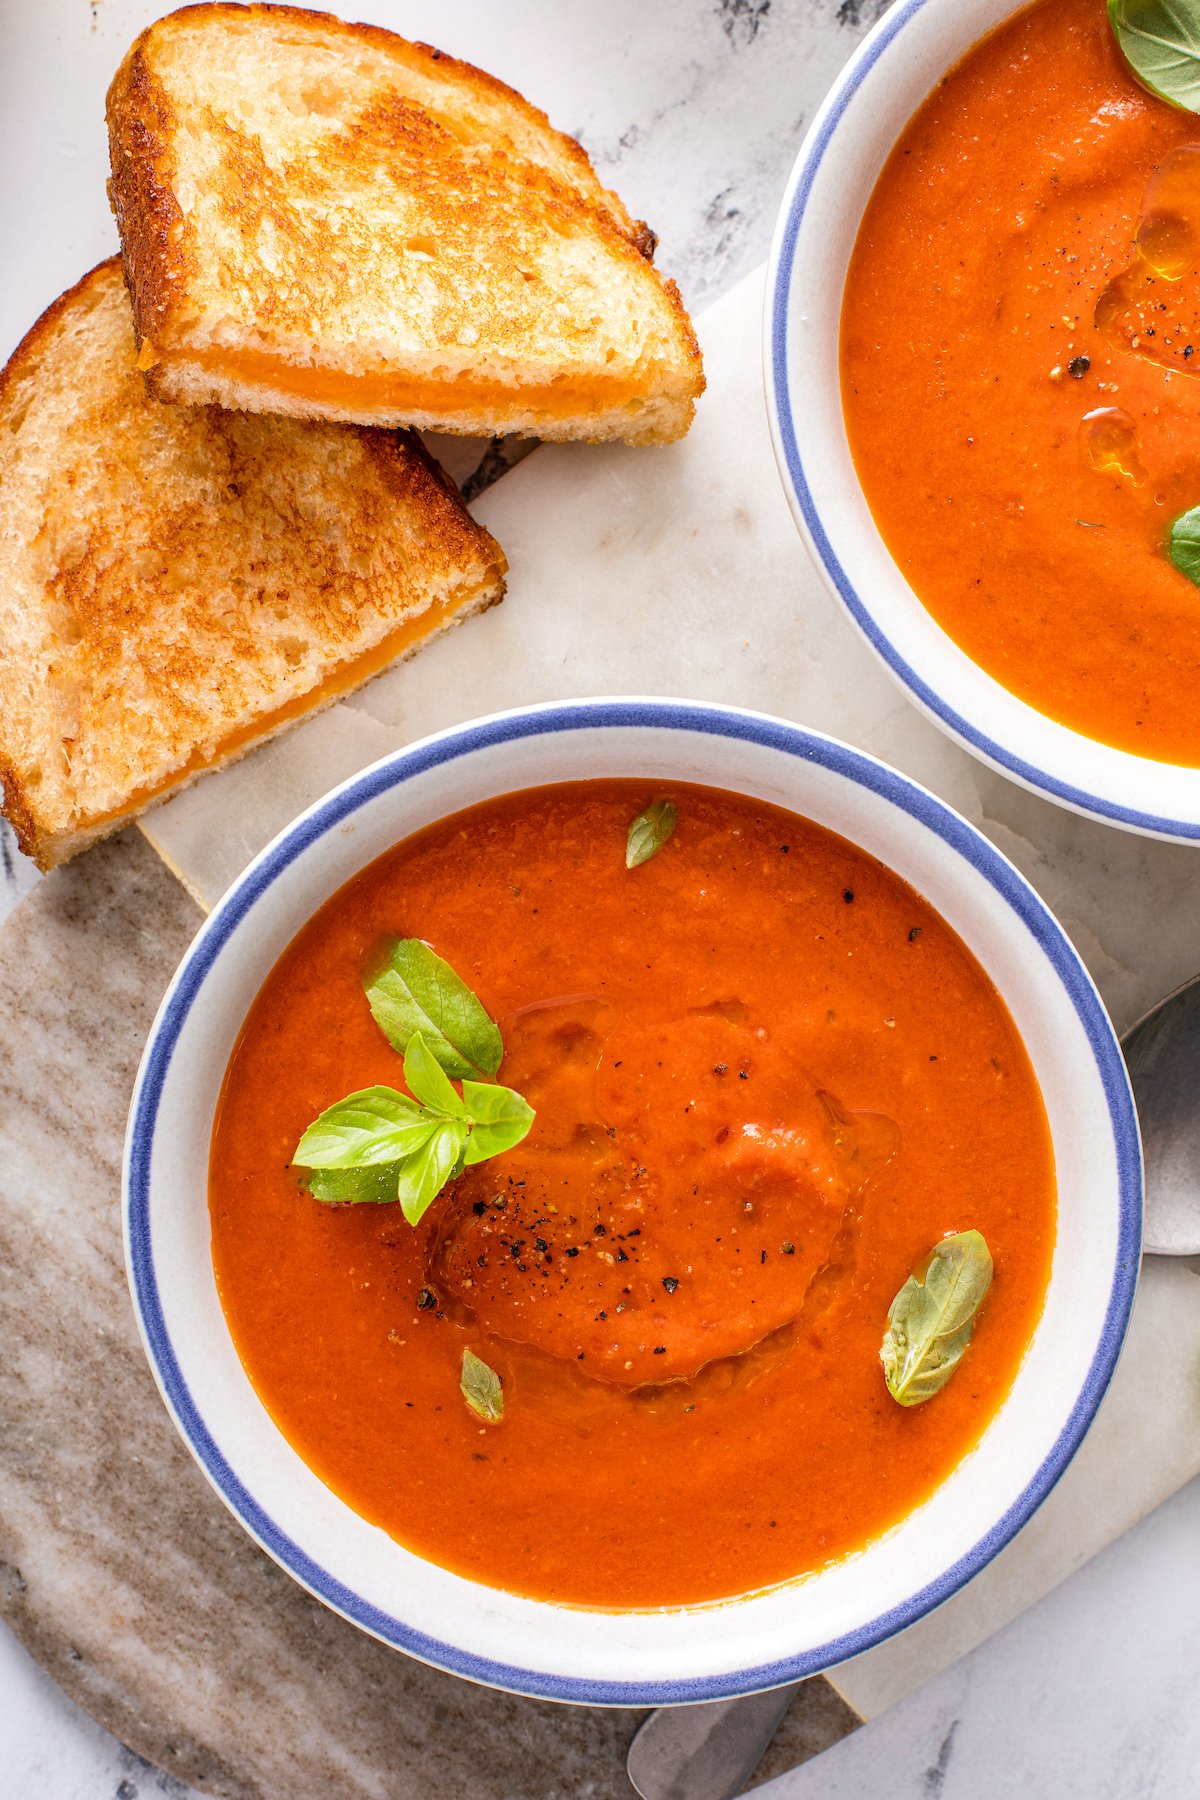 Two bowls of tomato soup with herbs, and two halves of a grilled cheese sandwich.